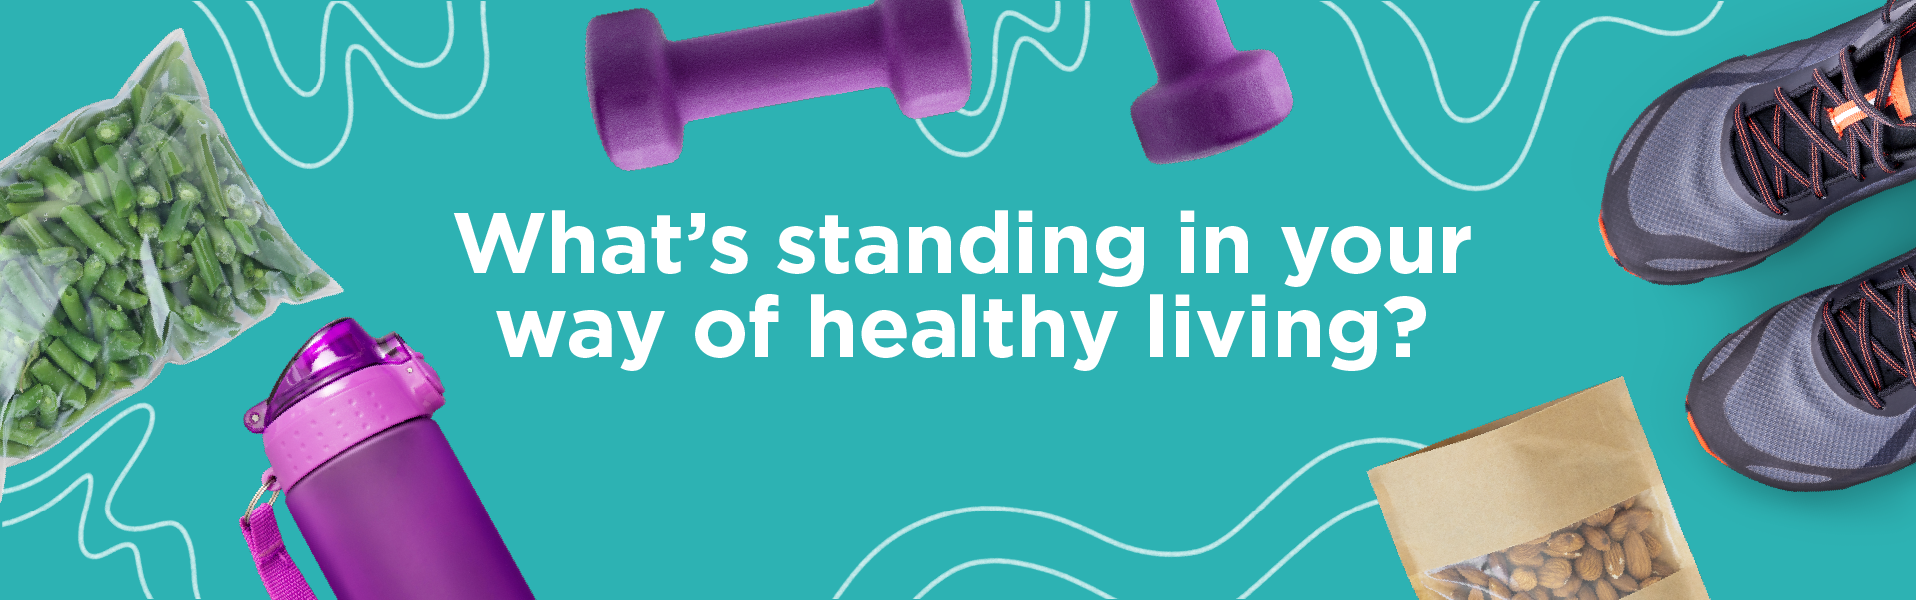 What’s standing in your way of healthy living?